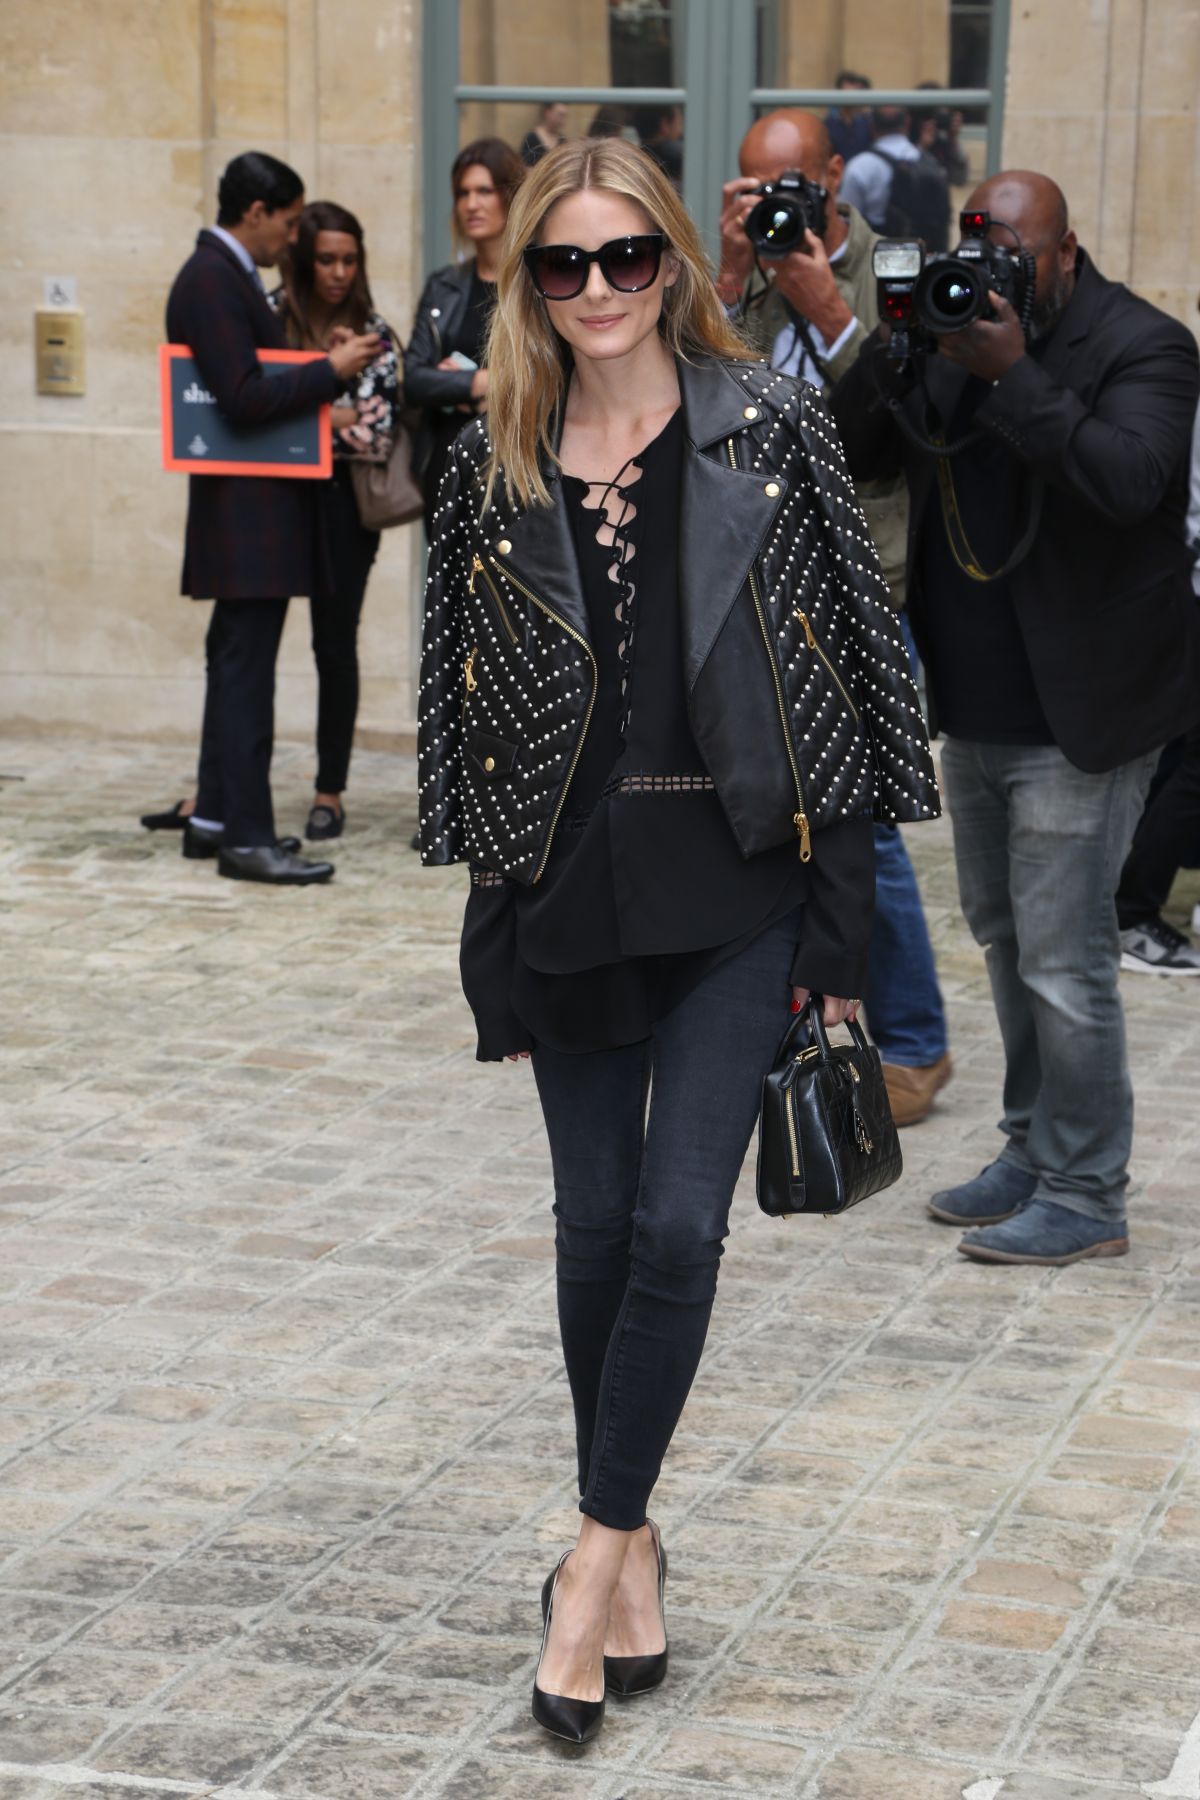 OLIVIA PALERMO at Alexis Mabille Fashion Show in Paris 07/05/2016 ...